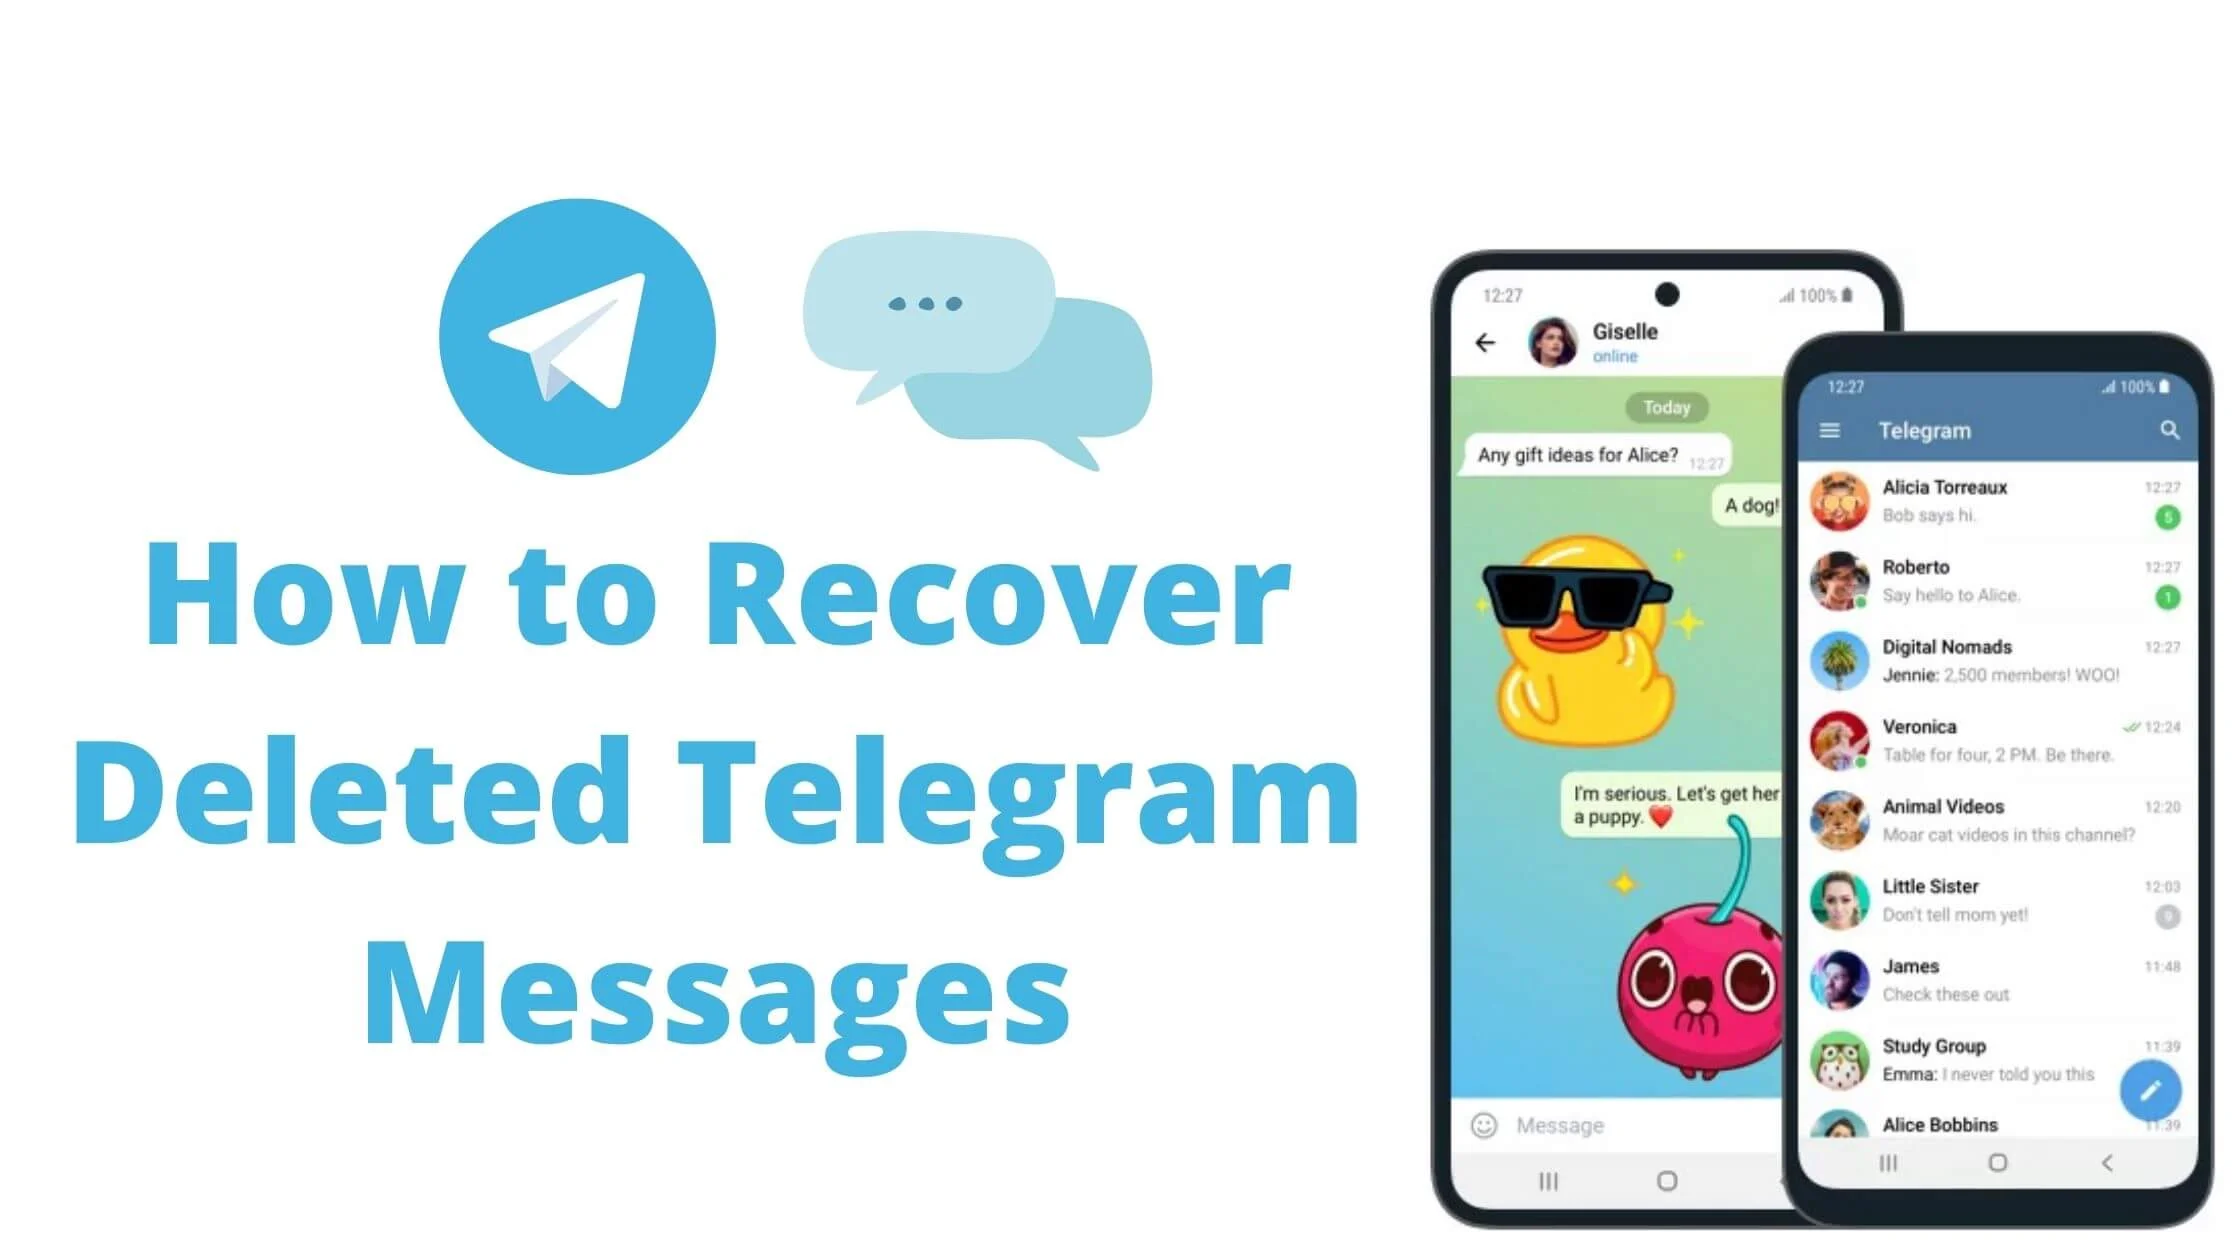 How To Recover Deleted Telegram Messages